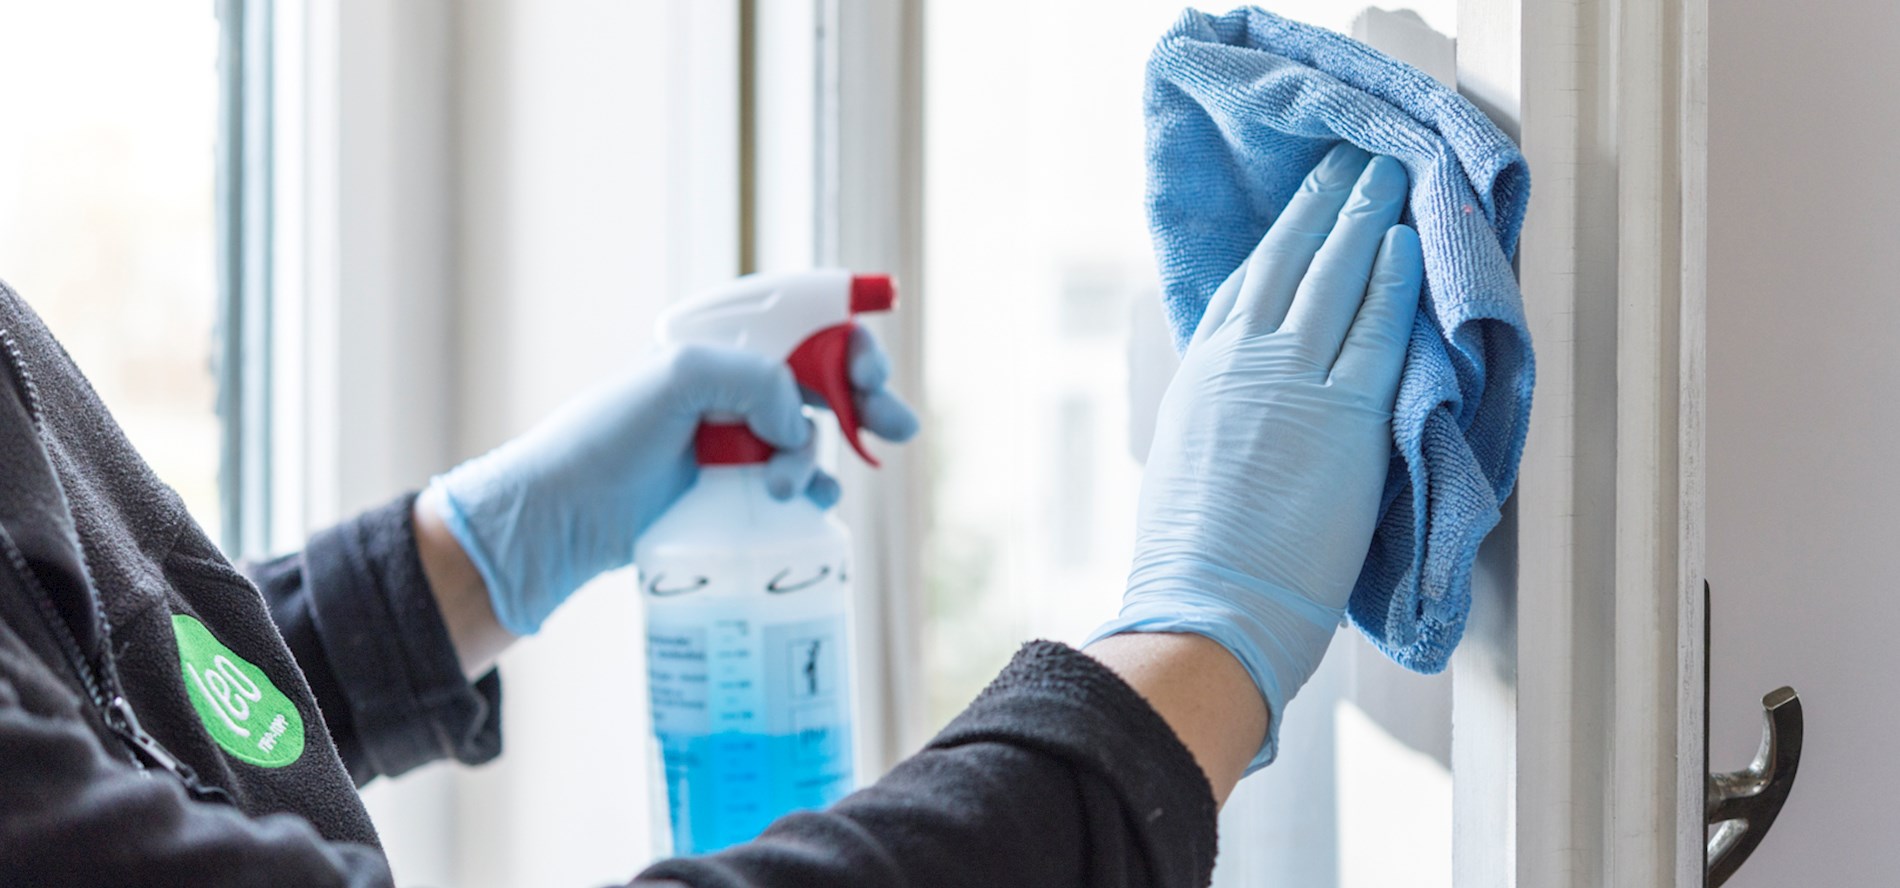 A person is cleaning a window. They are wearing light blue gloves. They are using cleaning products in a spray bottle and a light blue cloth.